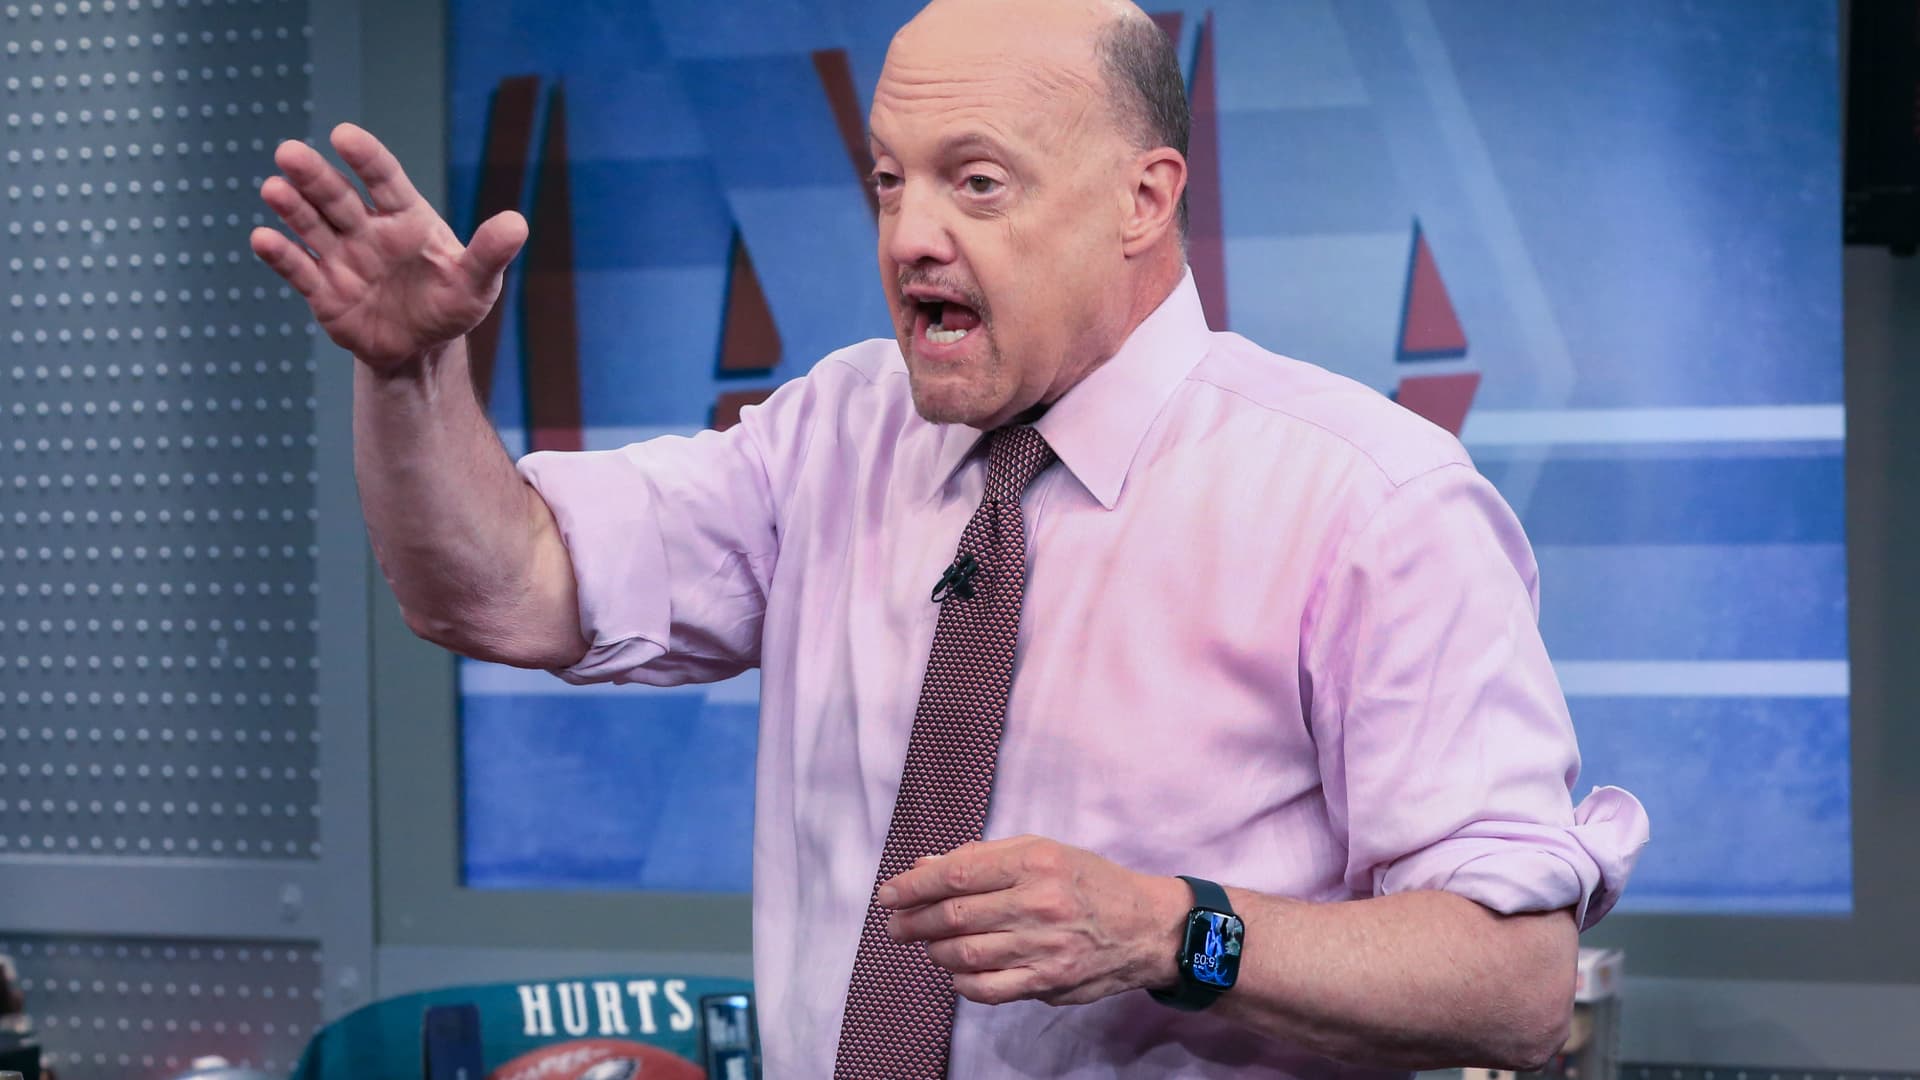 Charts suggest investors should buy these 3 stocks into weakness, Jim Cramer says